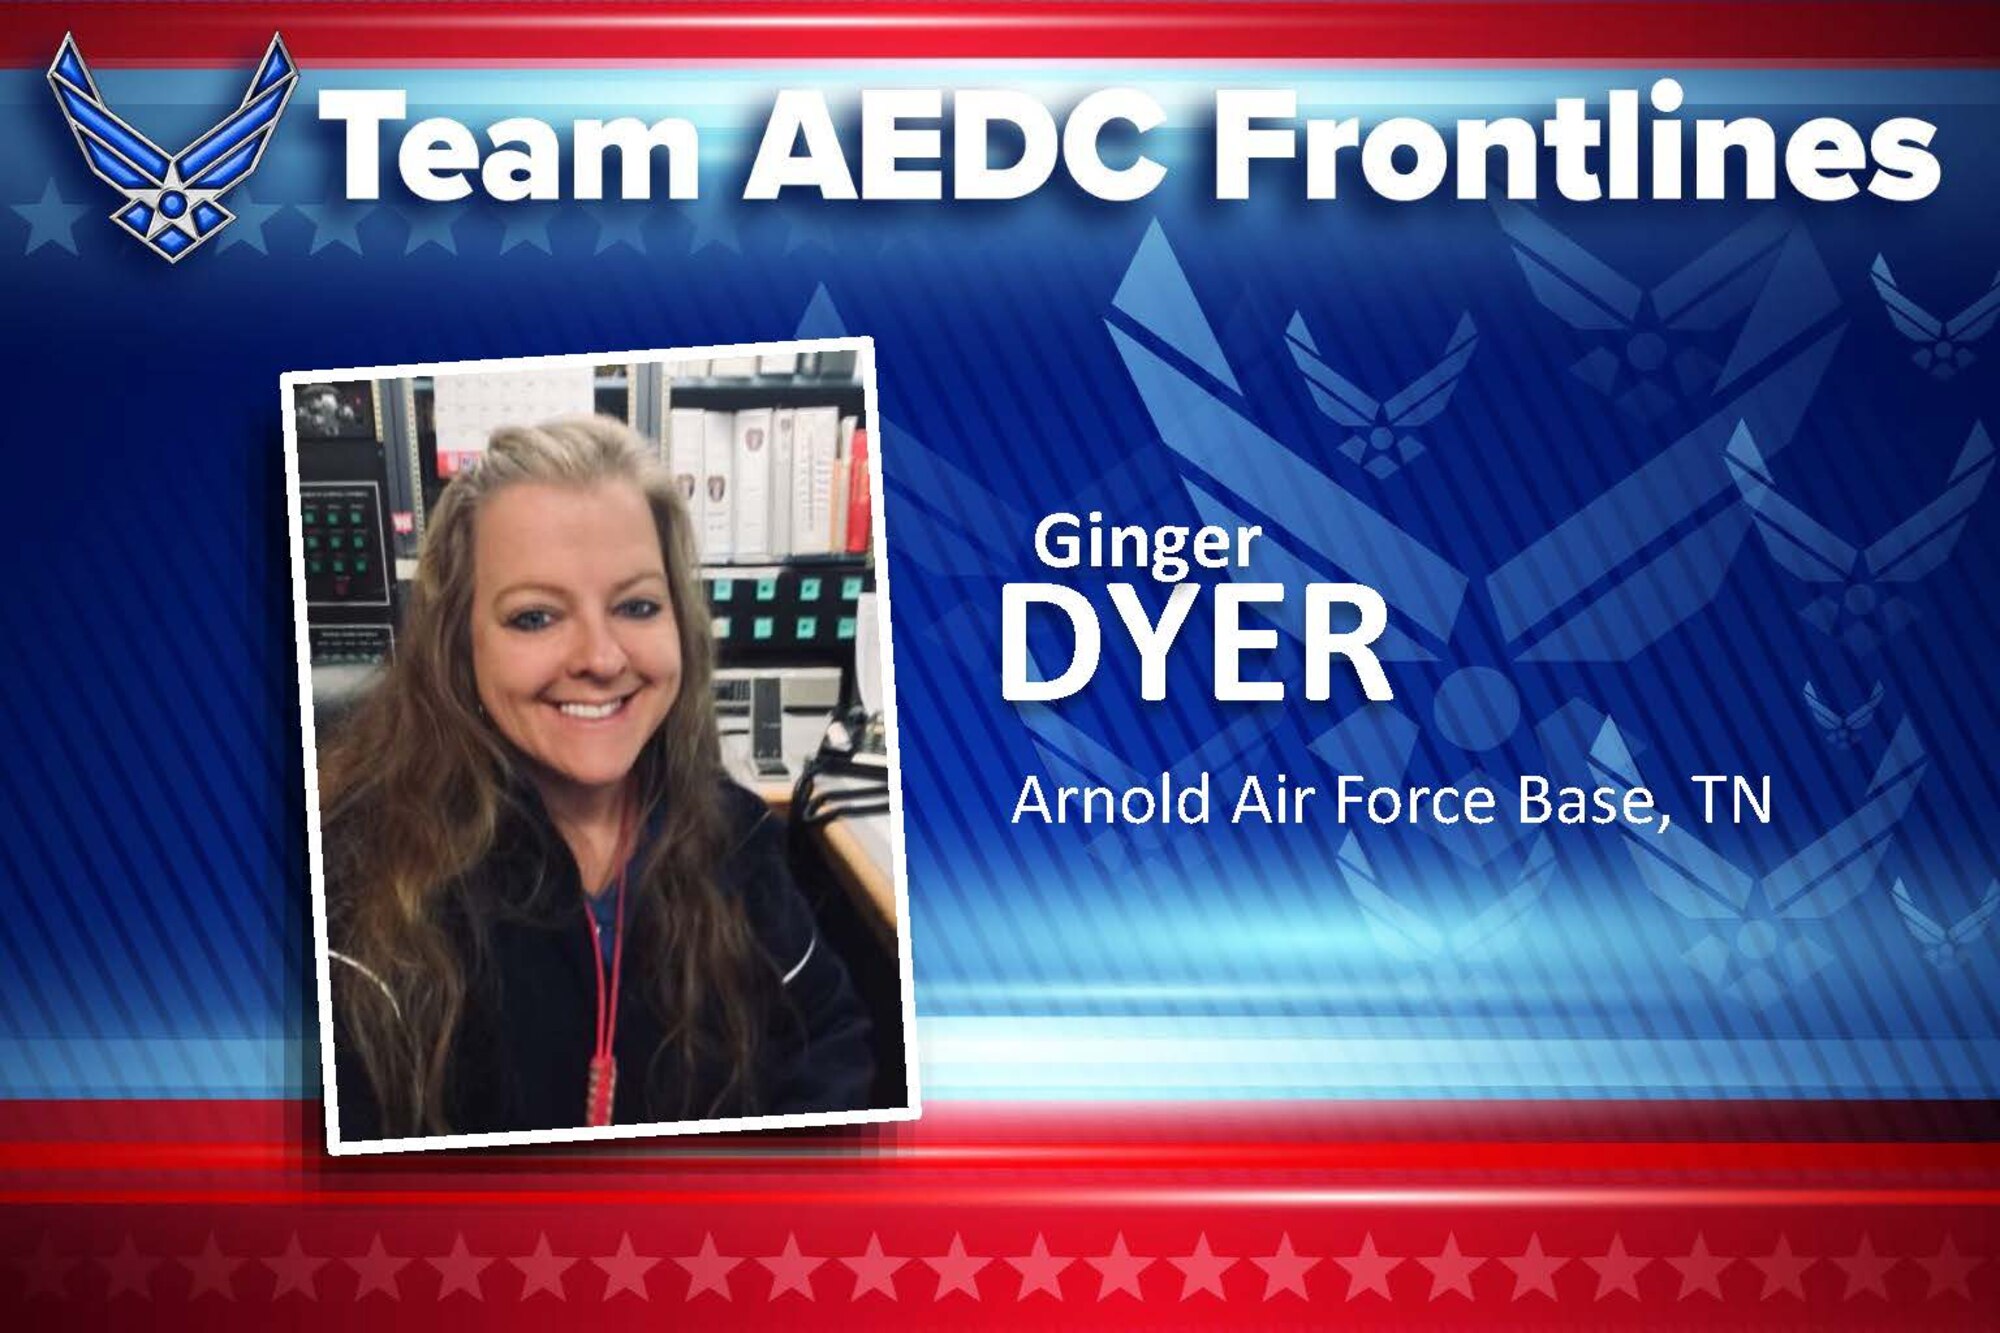 Ginger Dyer (U.S. Air Force graphic)